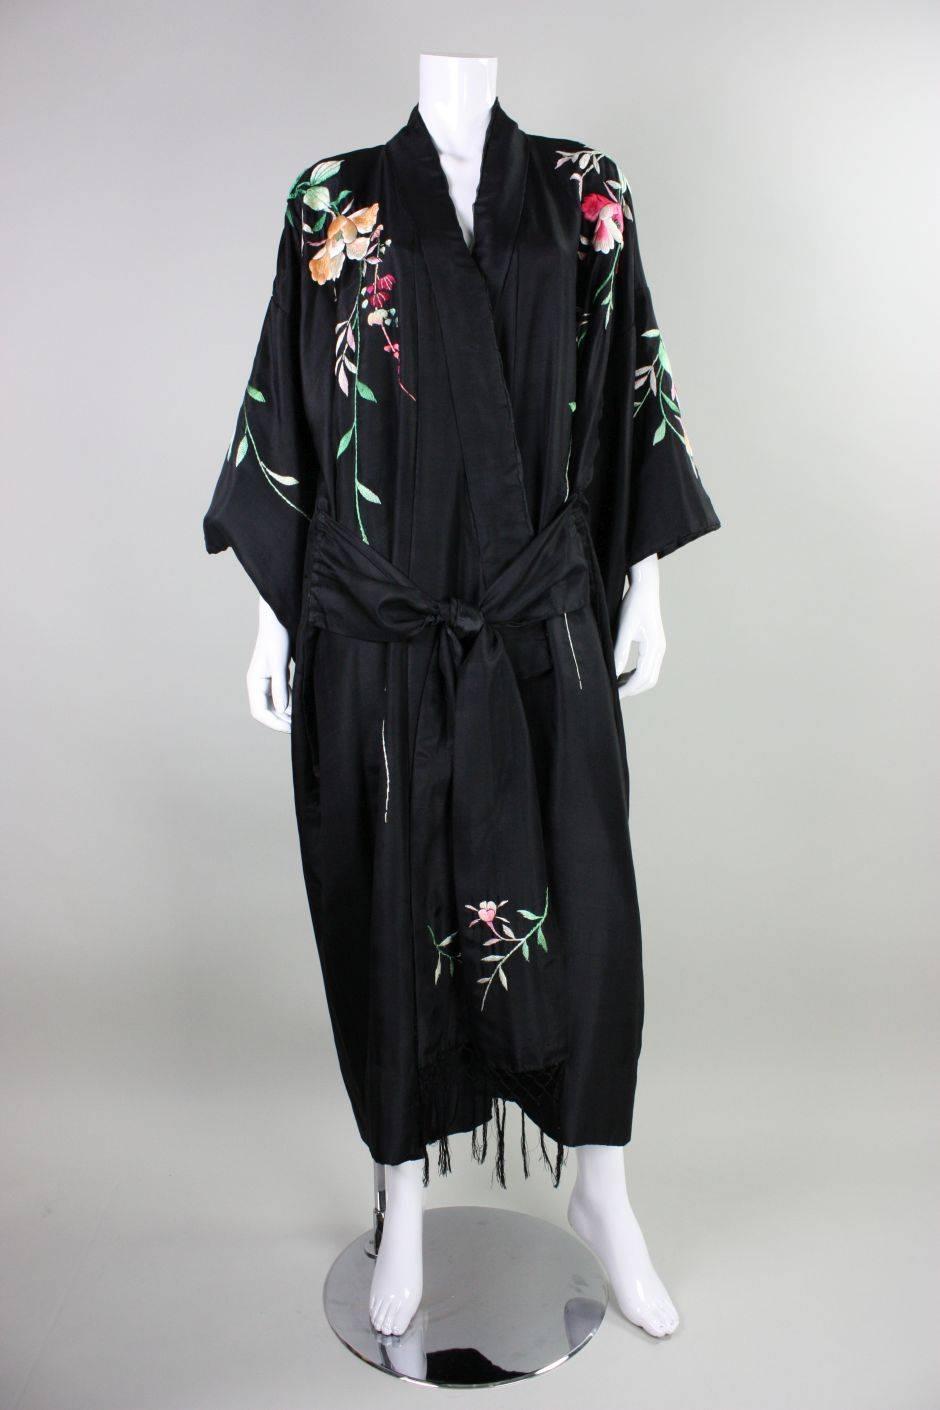 Vintage kimono robe dates to the 1920's and is made of black silk that features polychromatic padded hand-embroidery with a floral motif.  Fully lined. Waist ties are attached at approximately the side hips.

Measurements-
Bust: 50